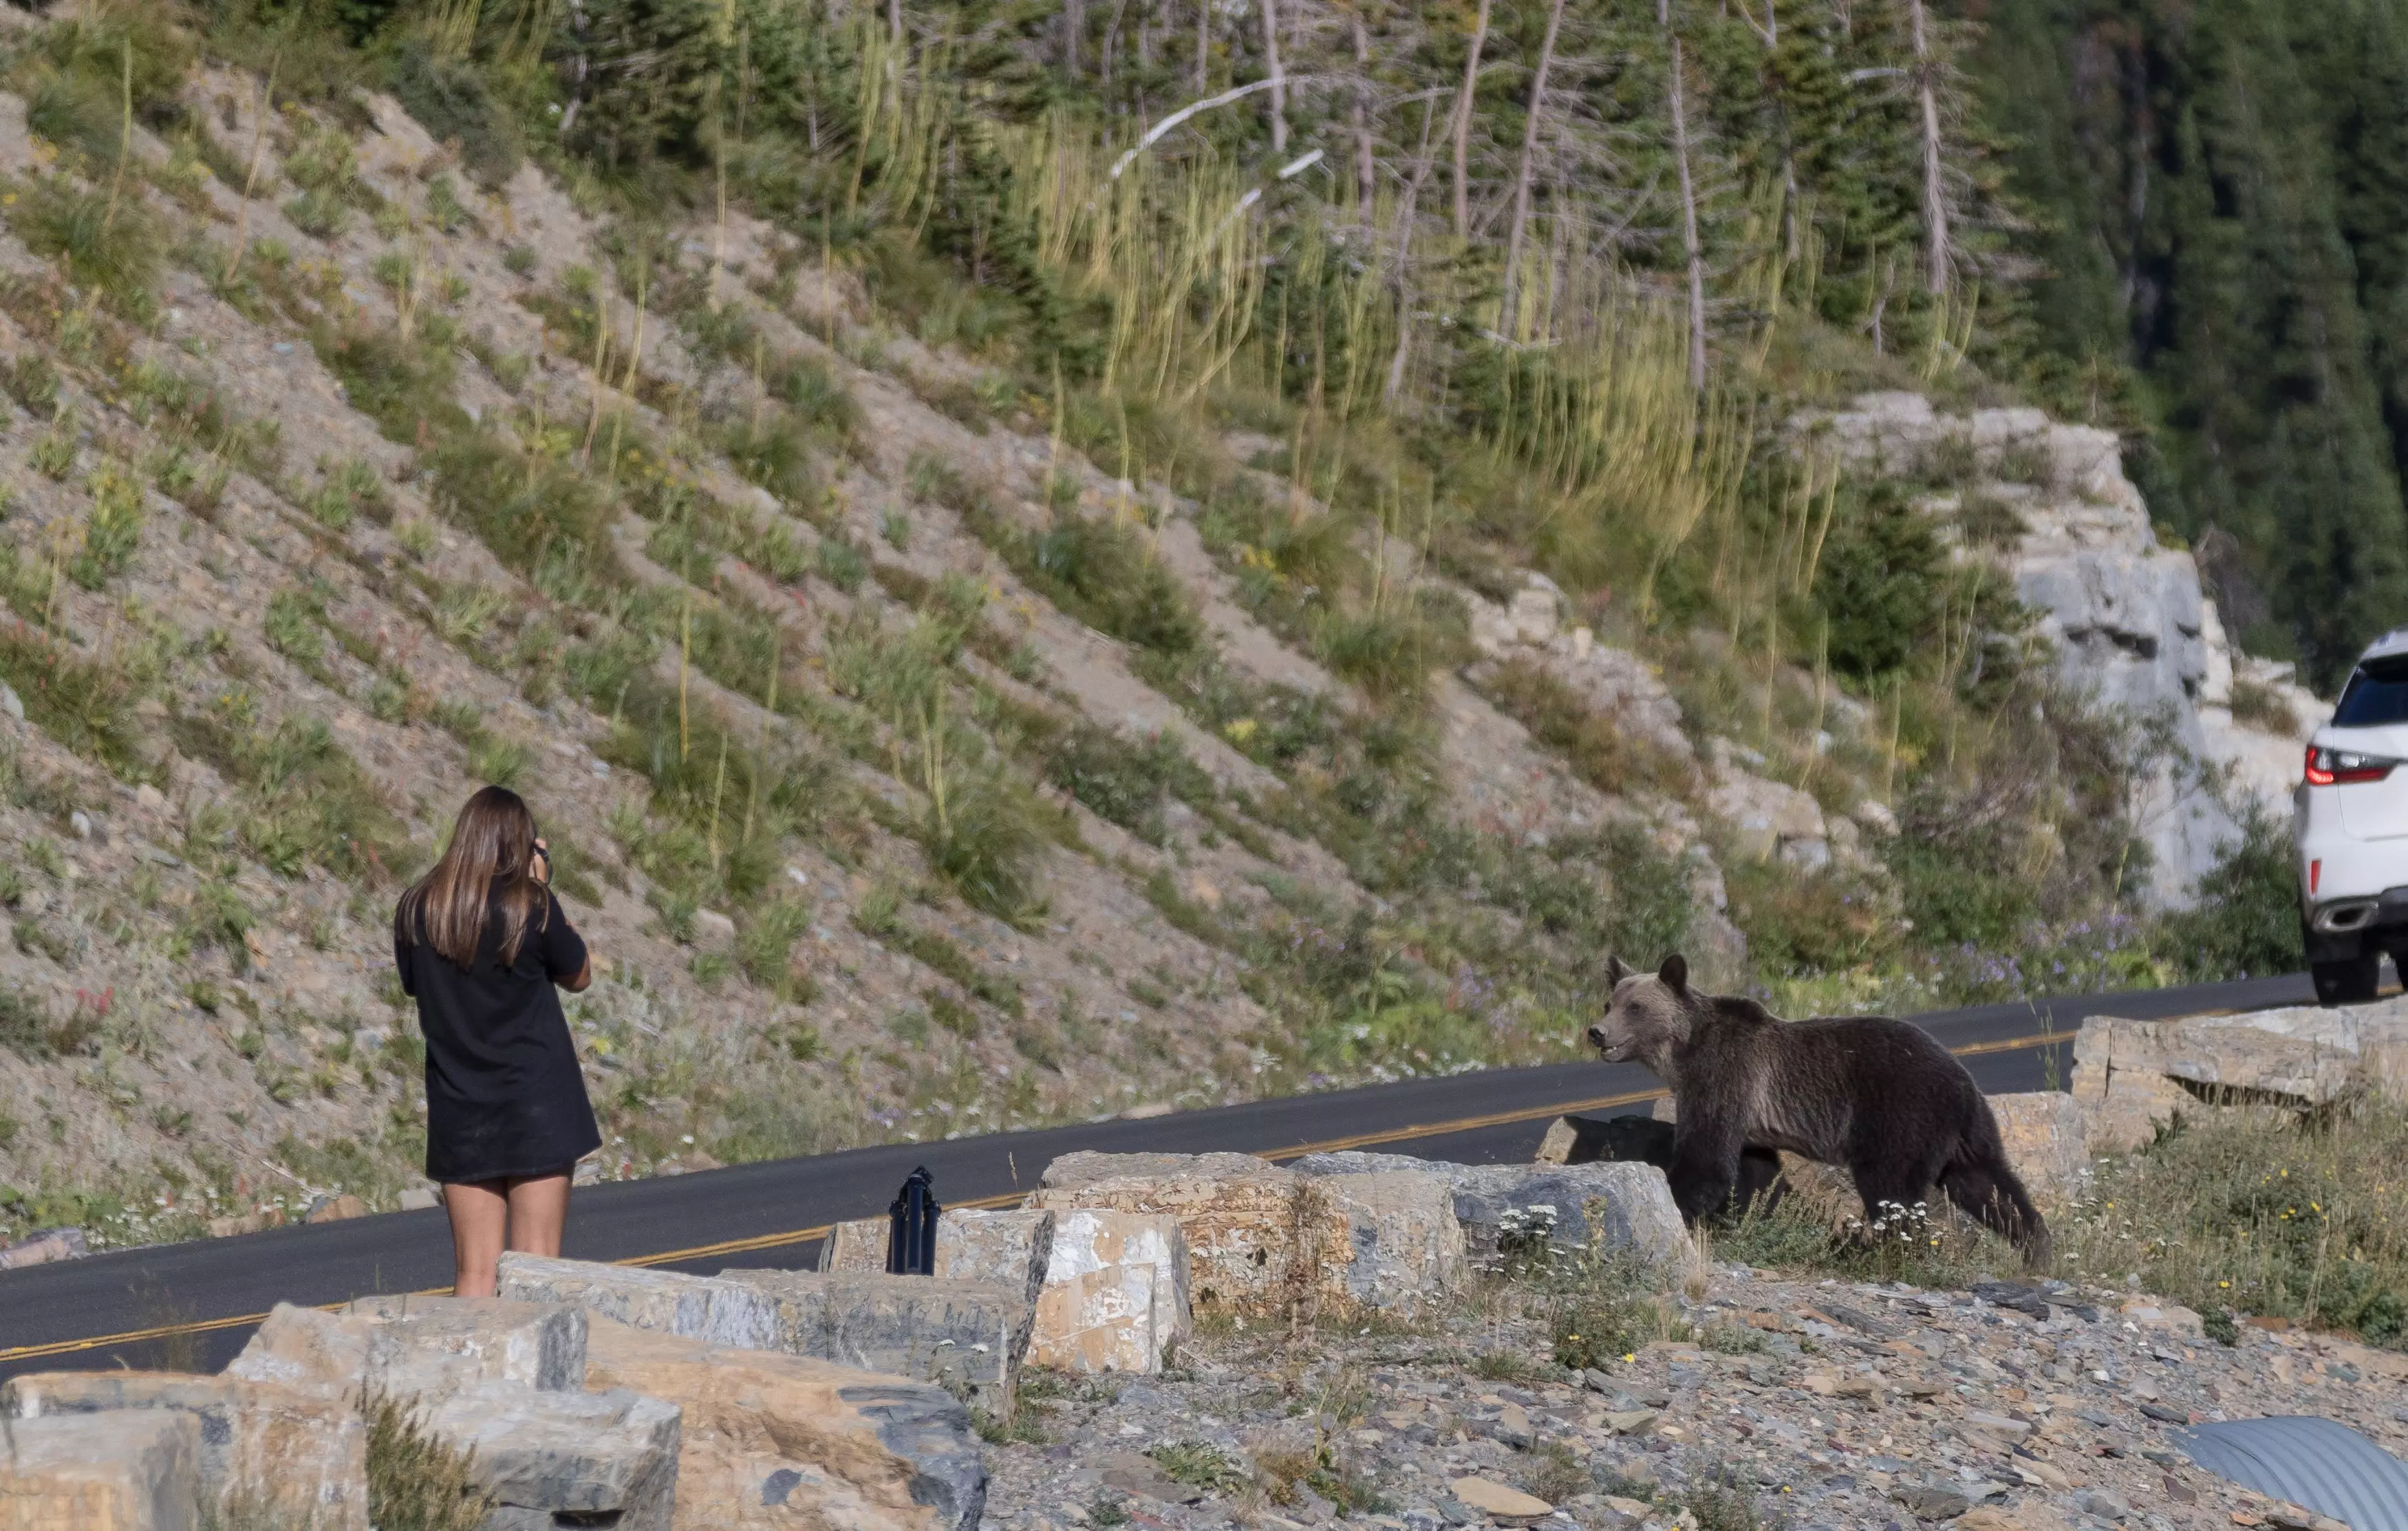 The encounter happened in Glacier National Park, Montana, last August.